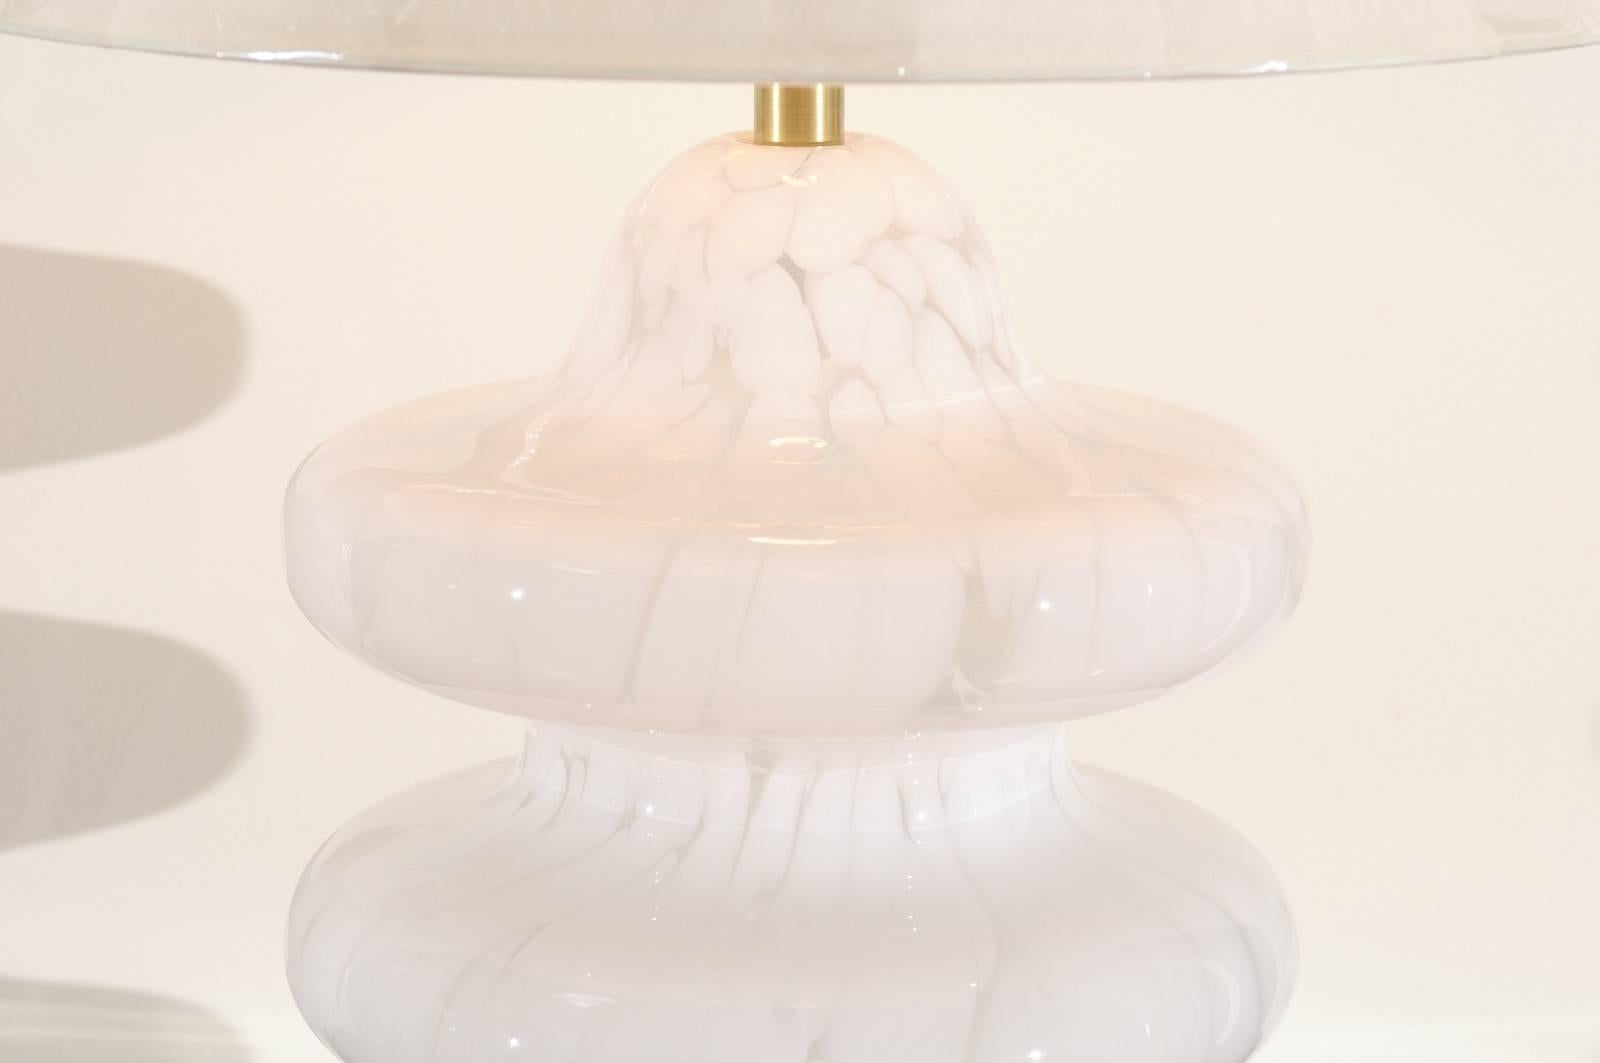 Exquisite Restored Blown Glass Three-Tired Pagoda Style Murano Lamps by Mazzega For Sale 3